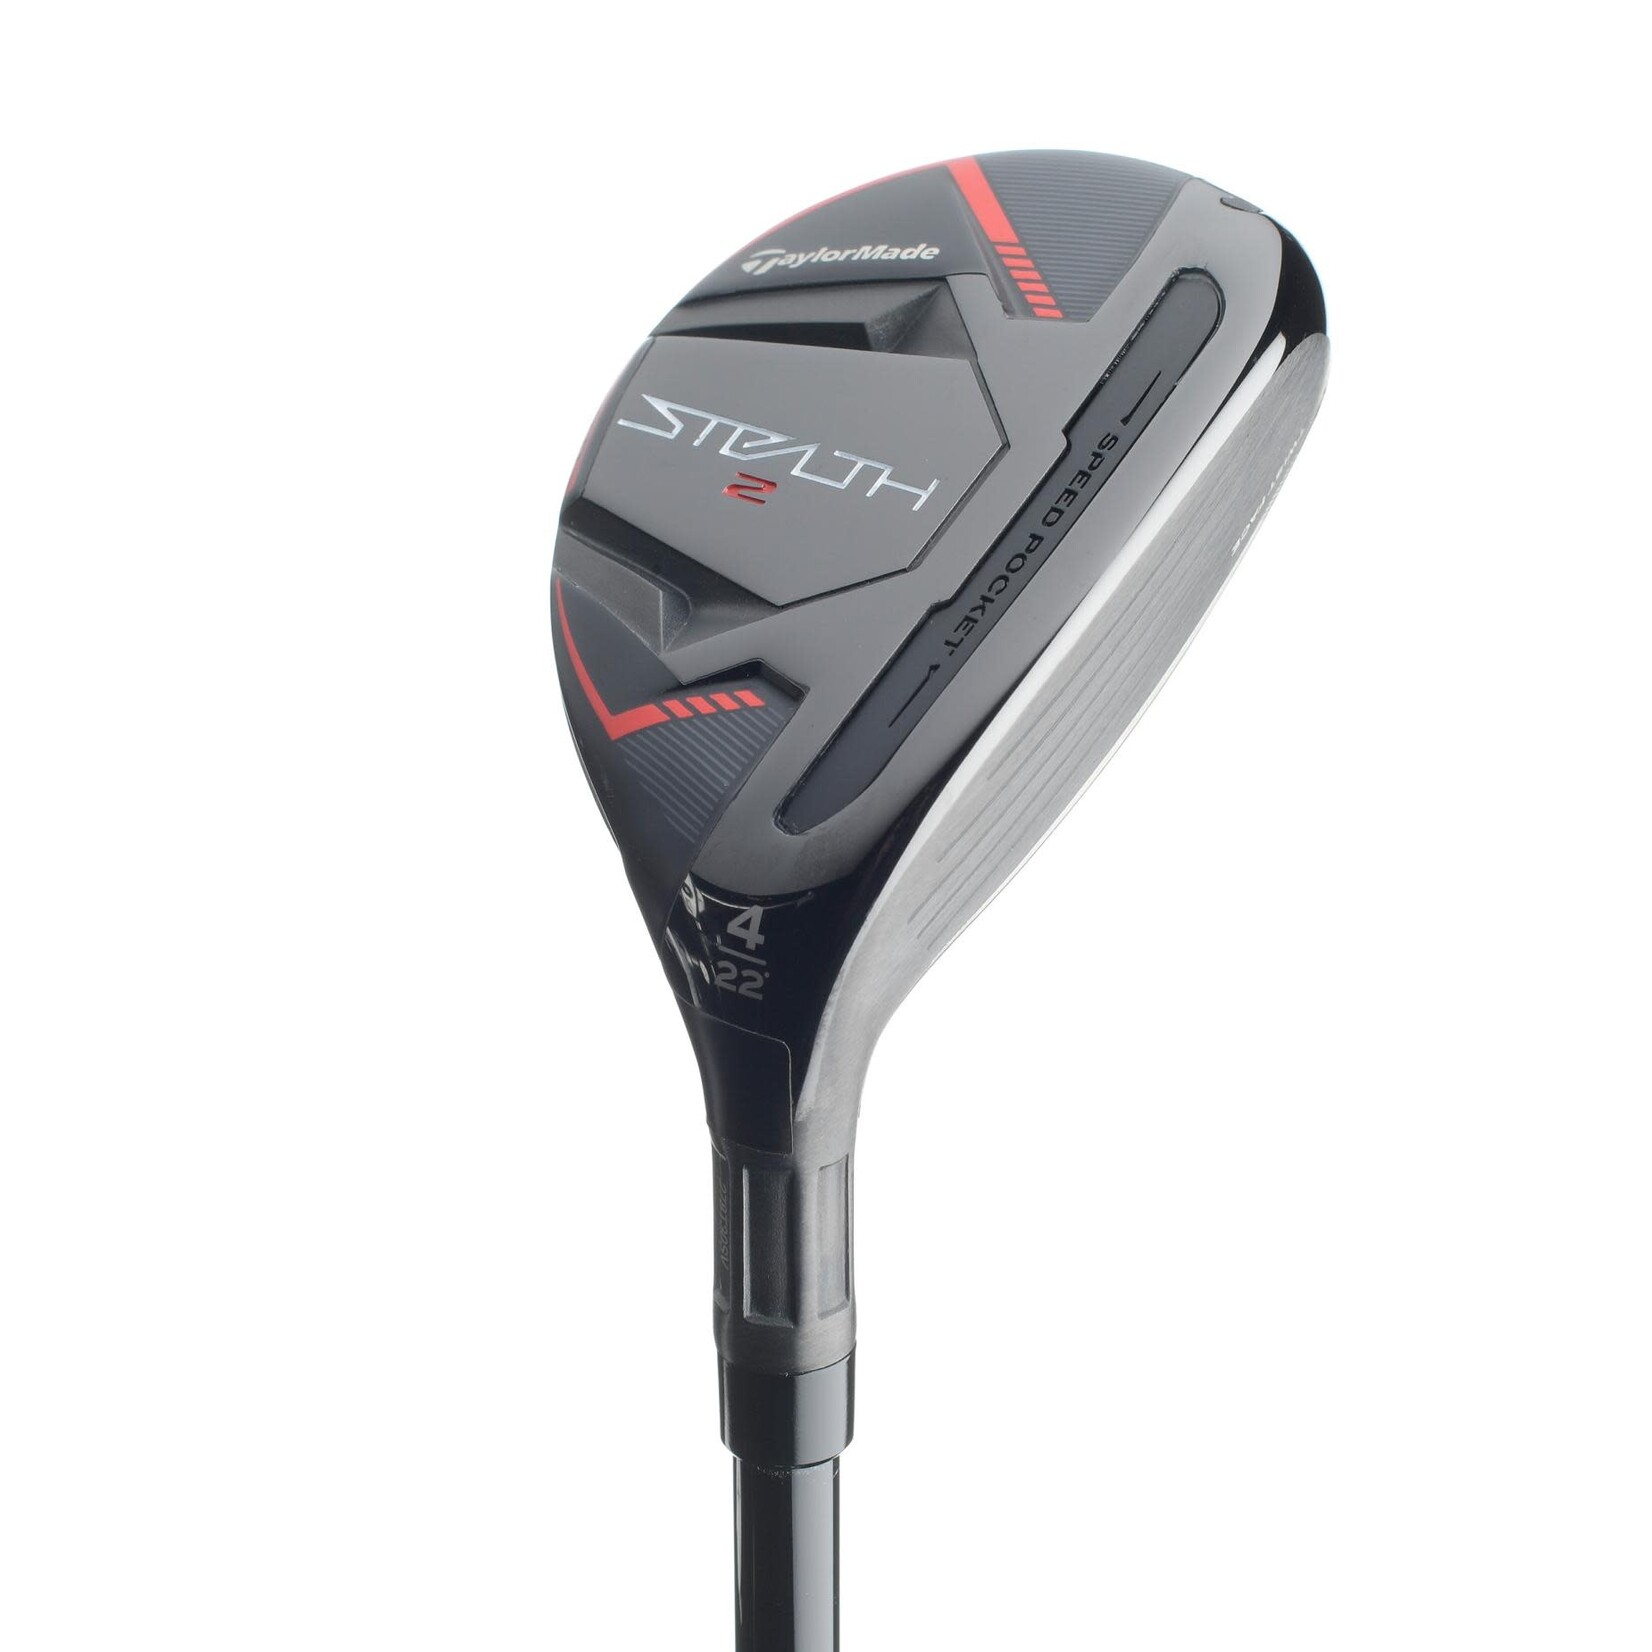 TAYLORMADE Taylormade stealth 2 hybrid